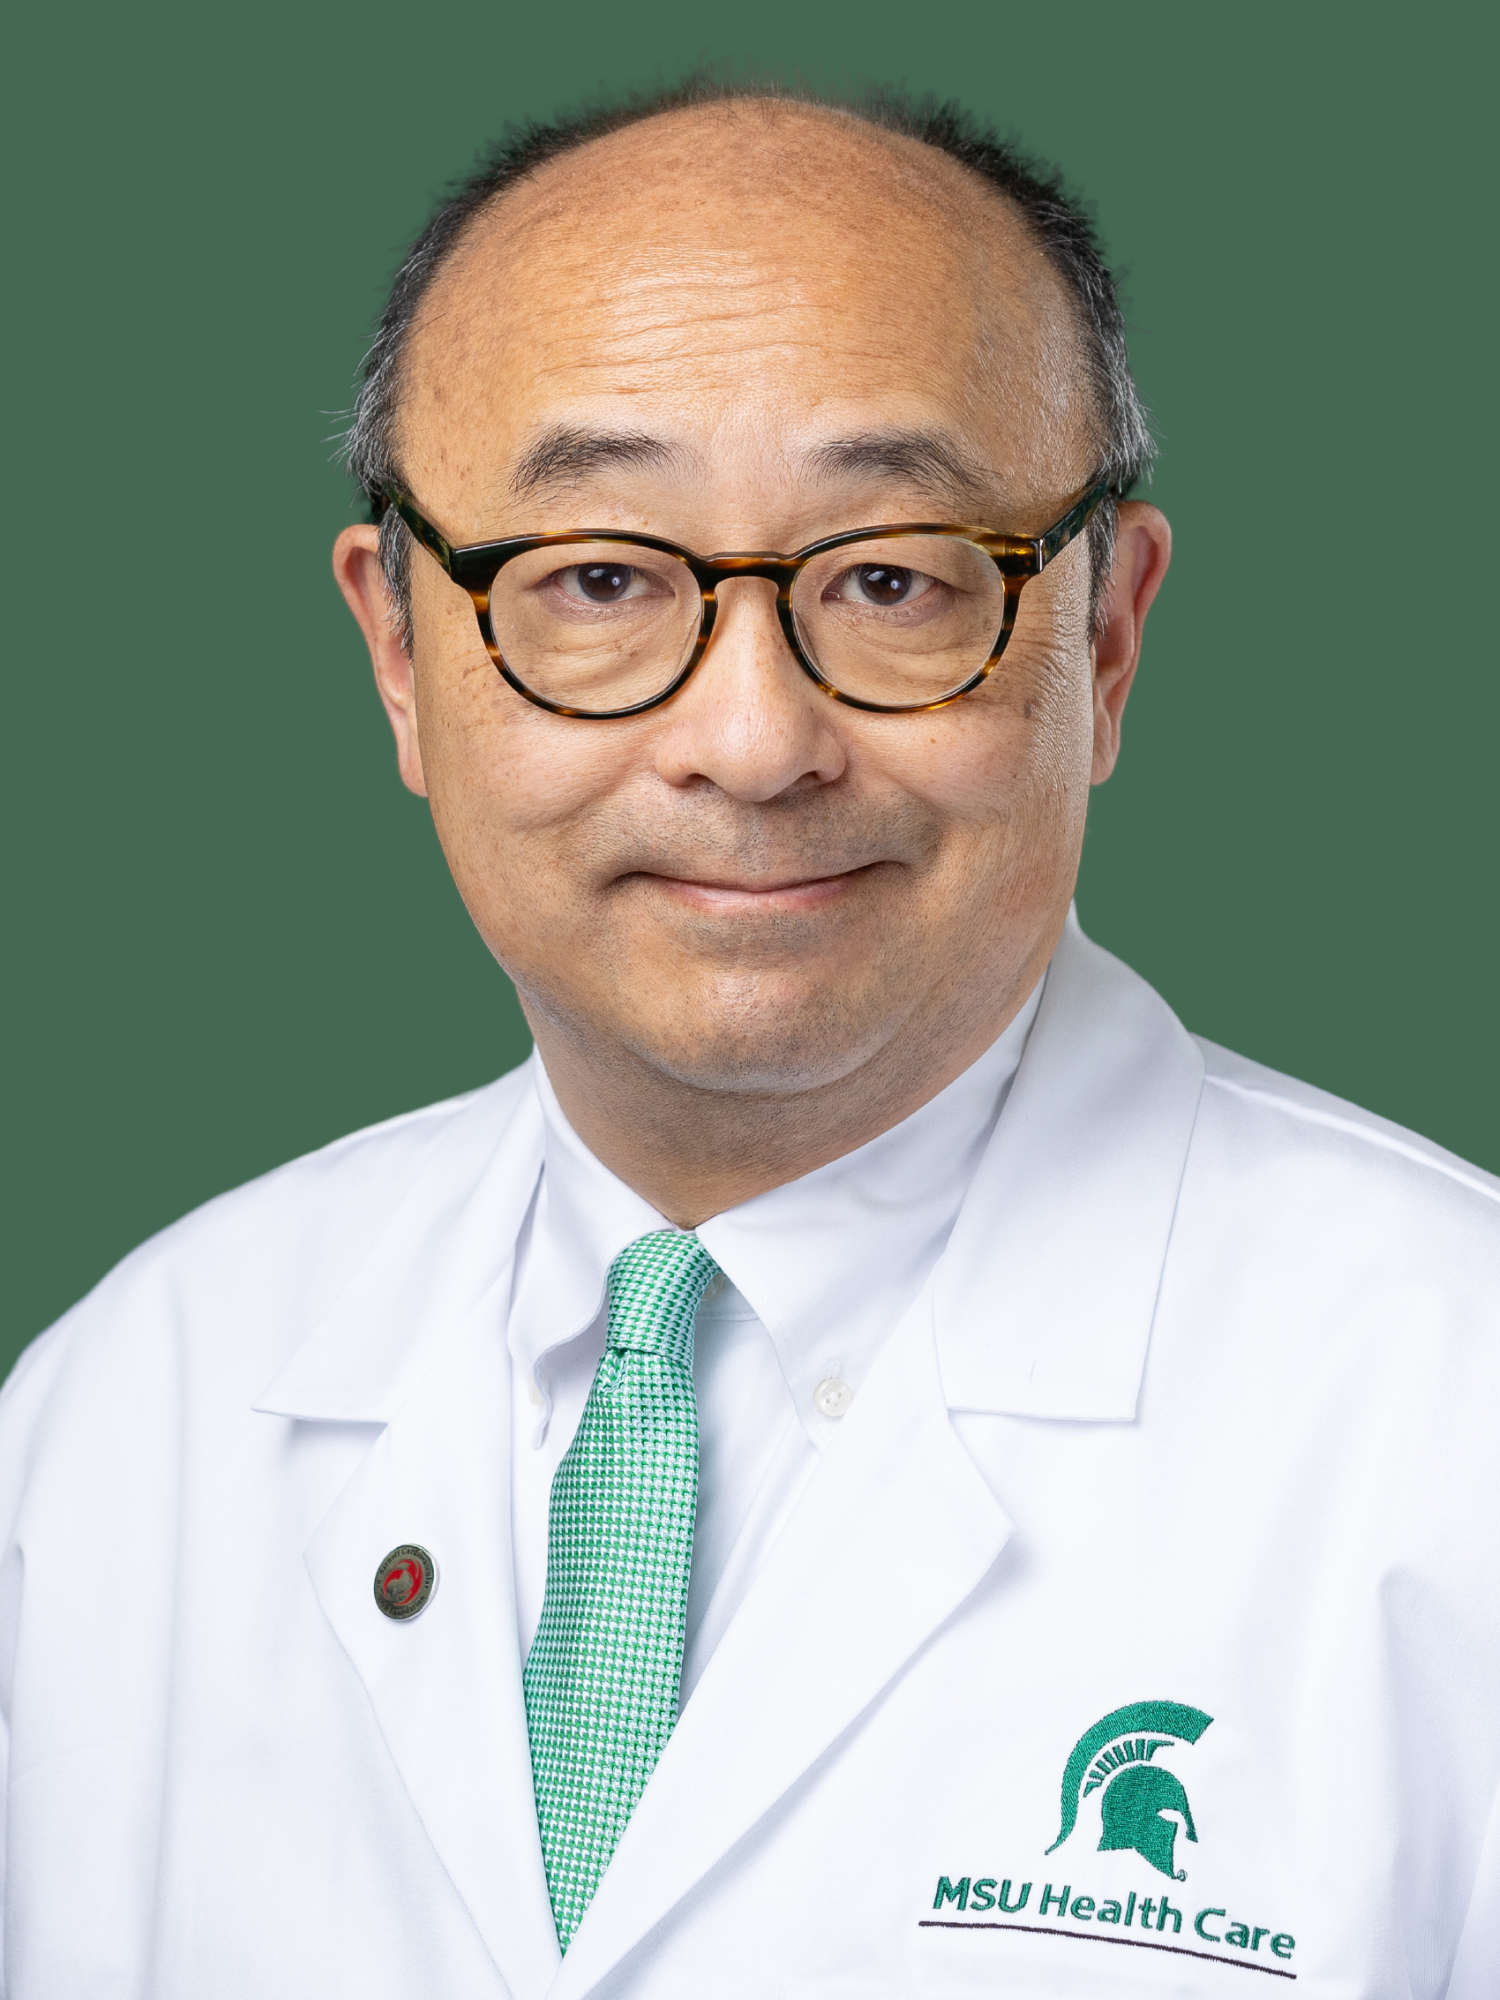 MSU Health Care cardiologist Dr. Charles Hong